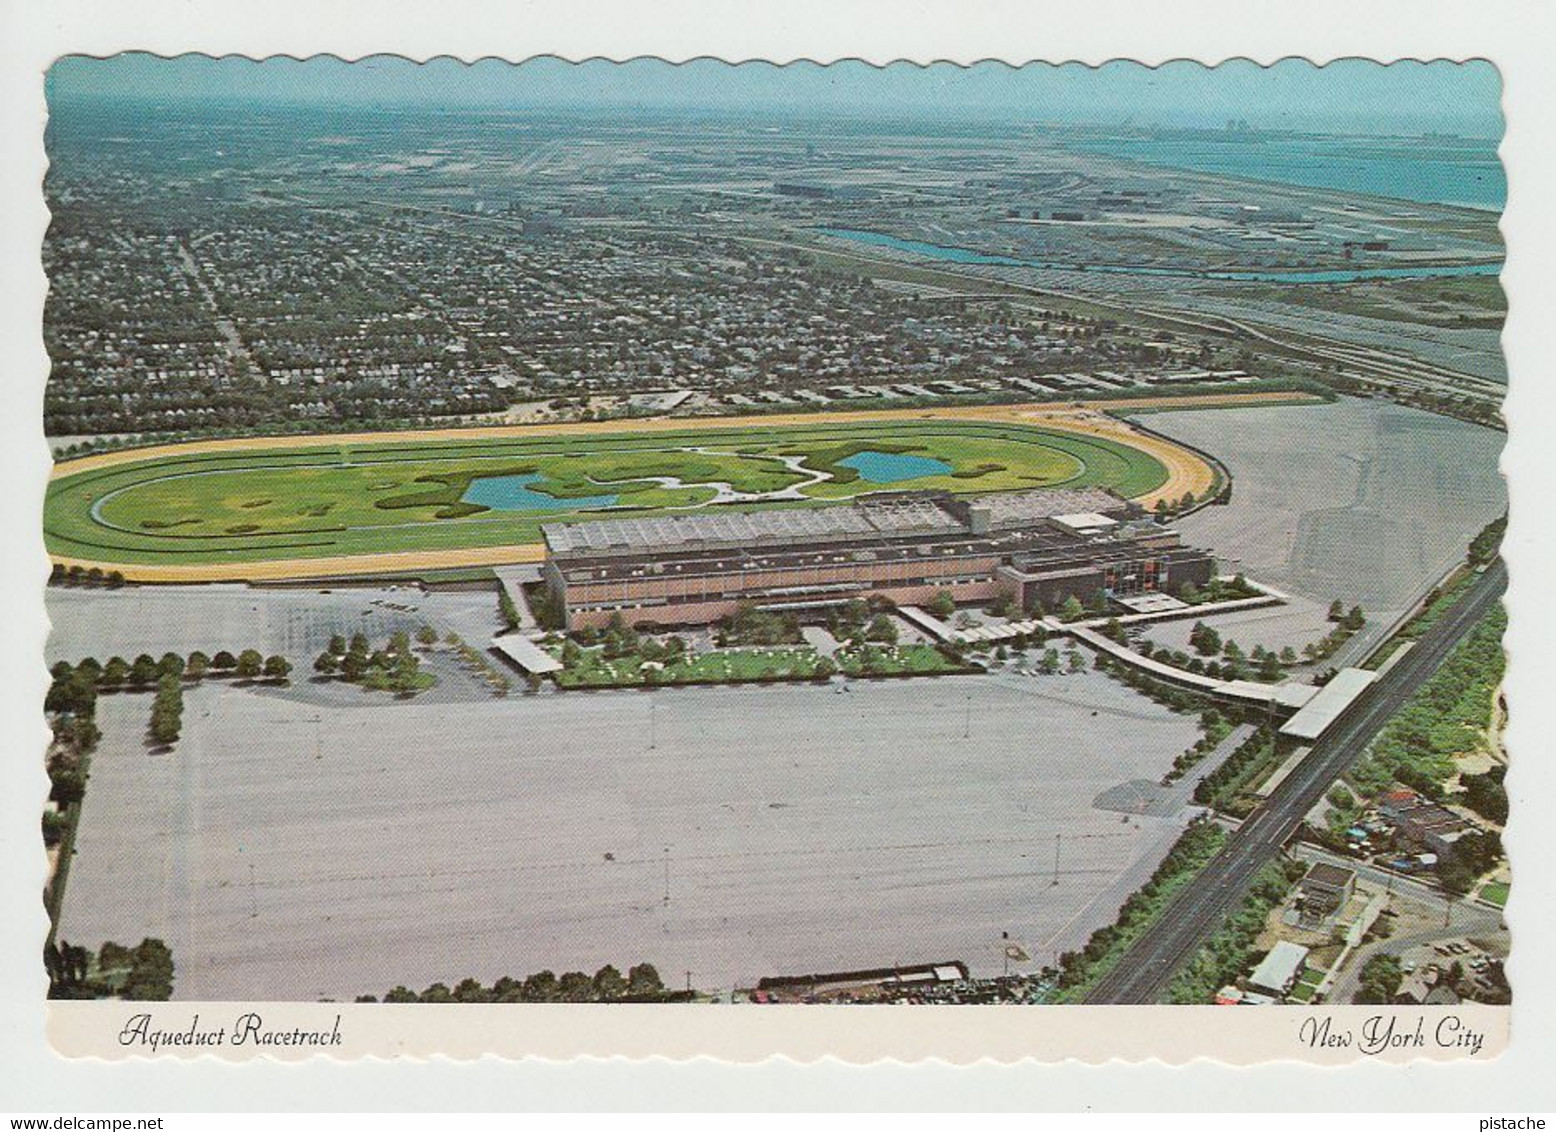 New York City - Aqueduct Racetrack Race Track - By Manhattan Post Card Inc. No DR-34637-D - 4 X 6 - Unused - 2 Scans - Stadiums & Sporting Infrastructures